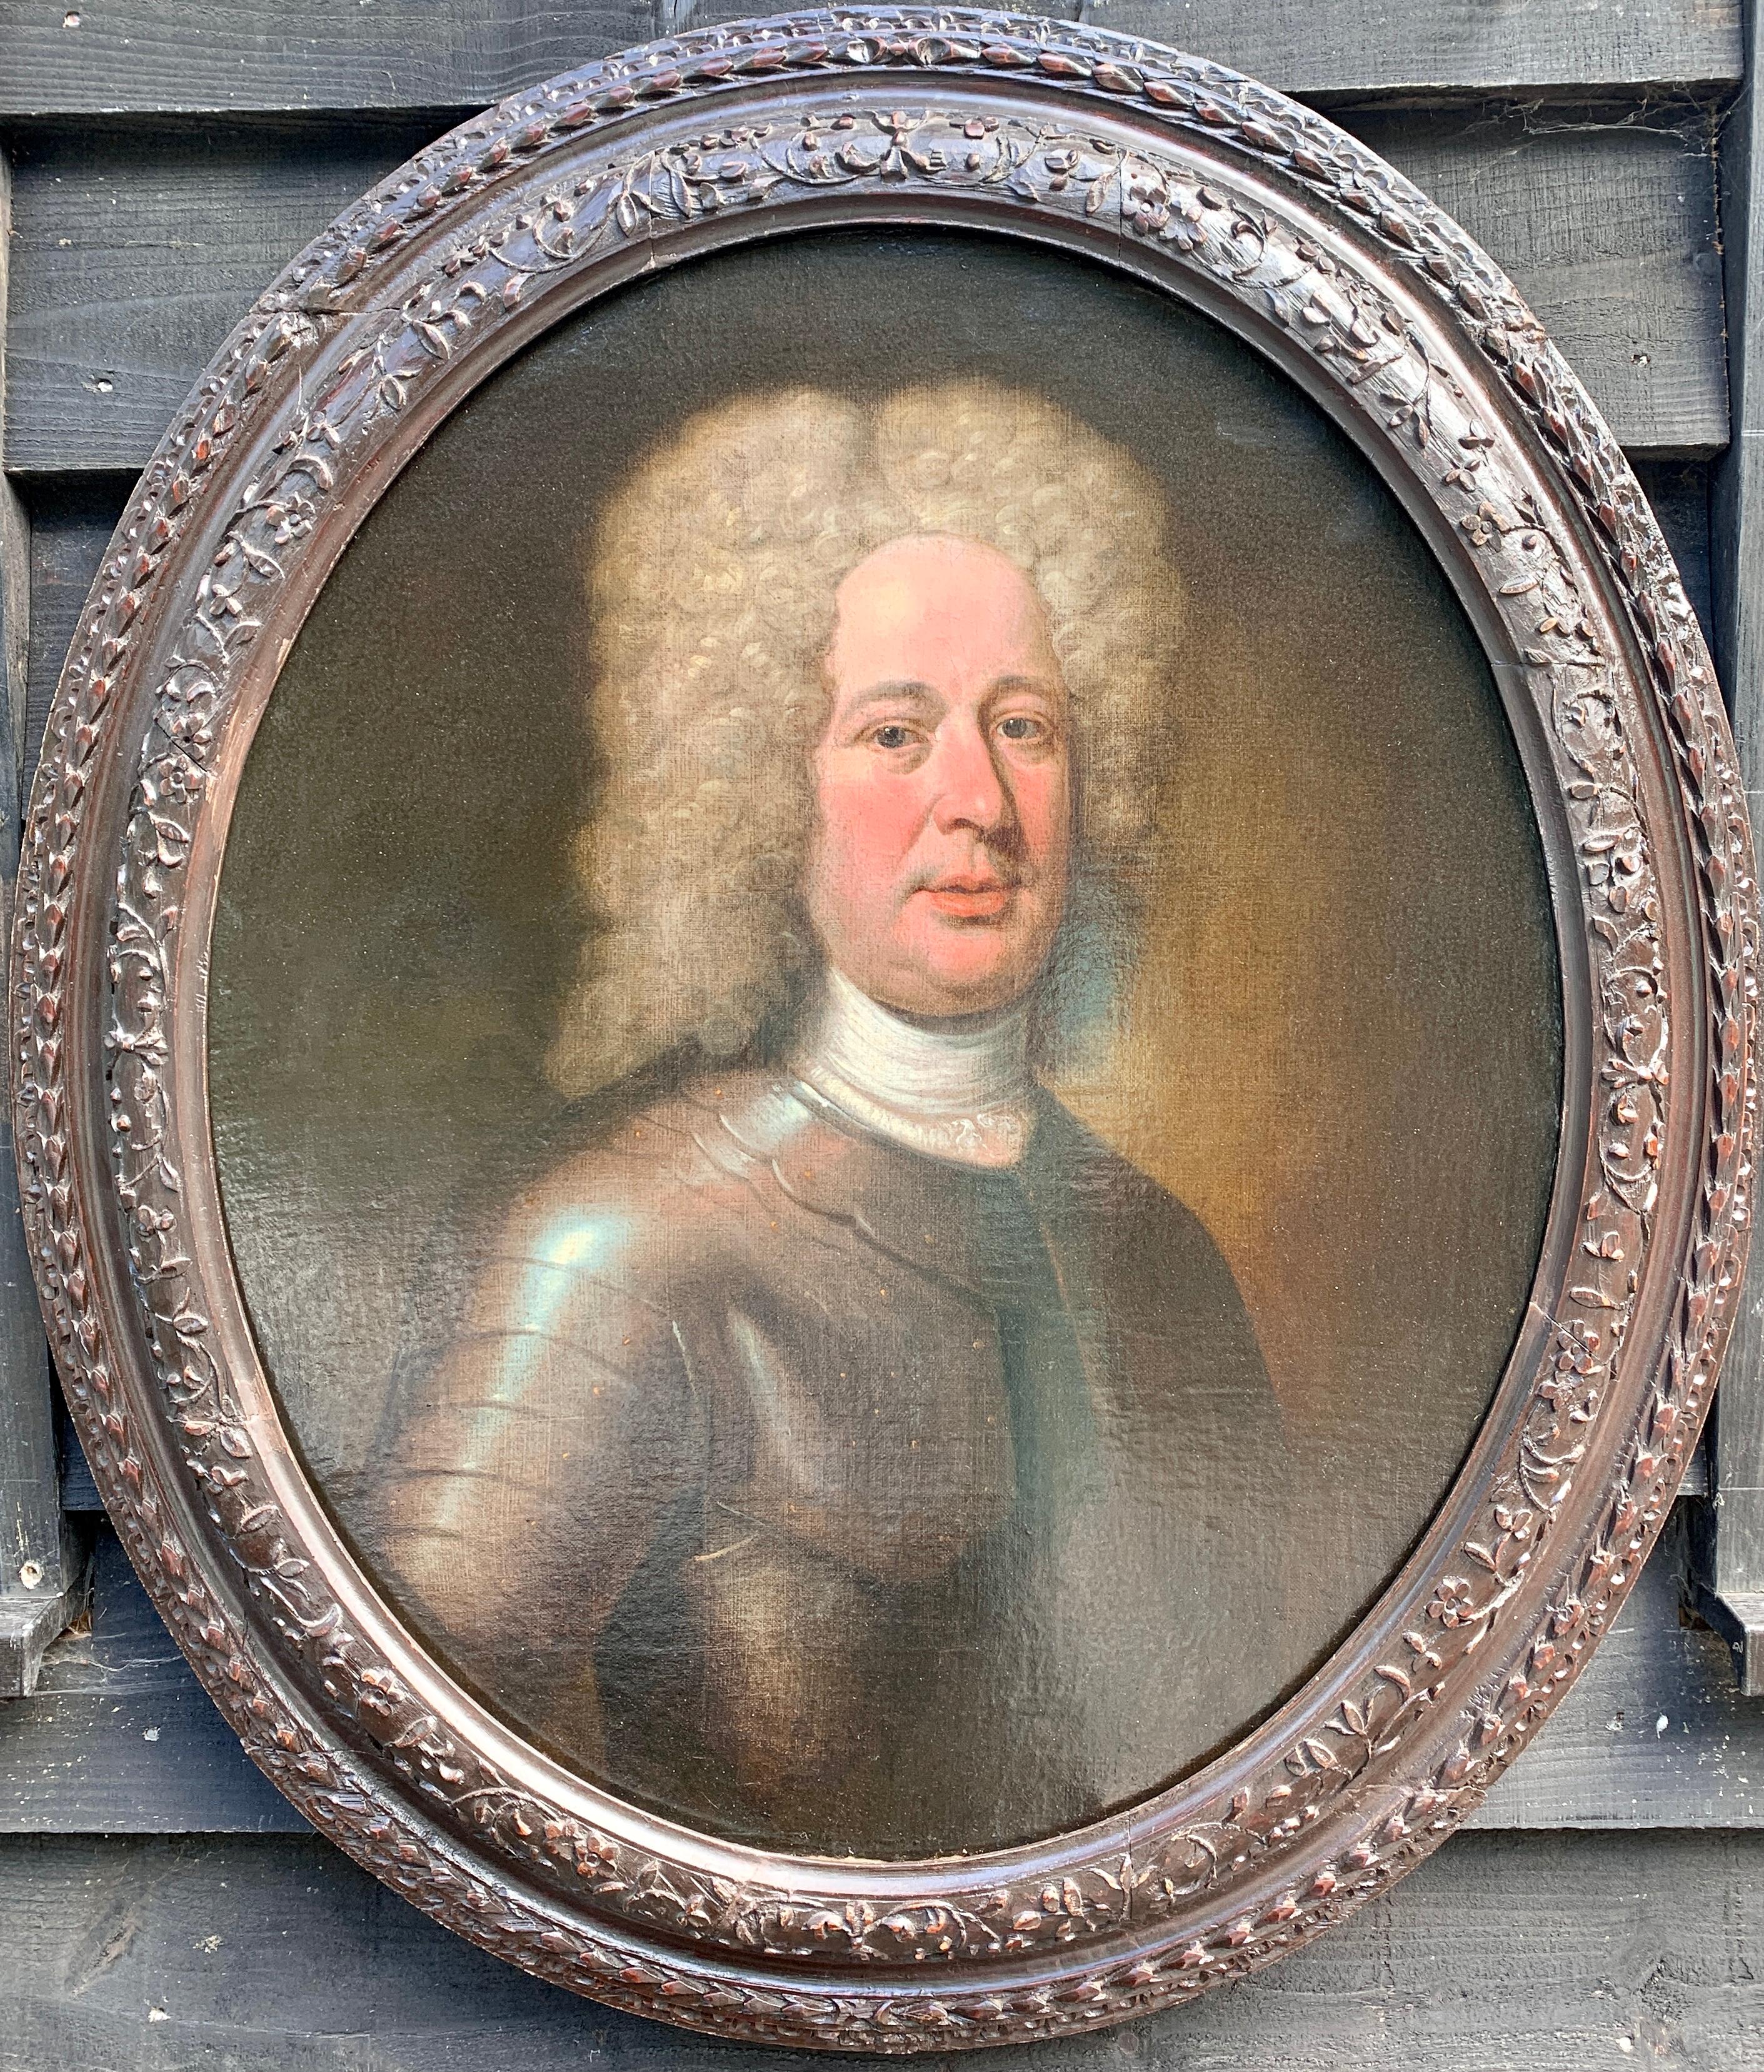 18th century oil painting English portrait of a gent in armor, wearing a wig